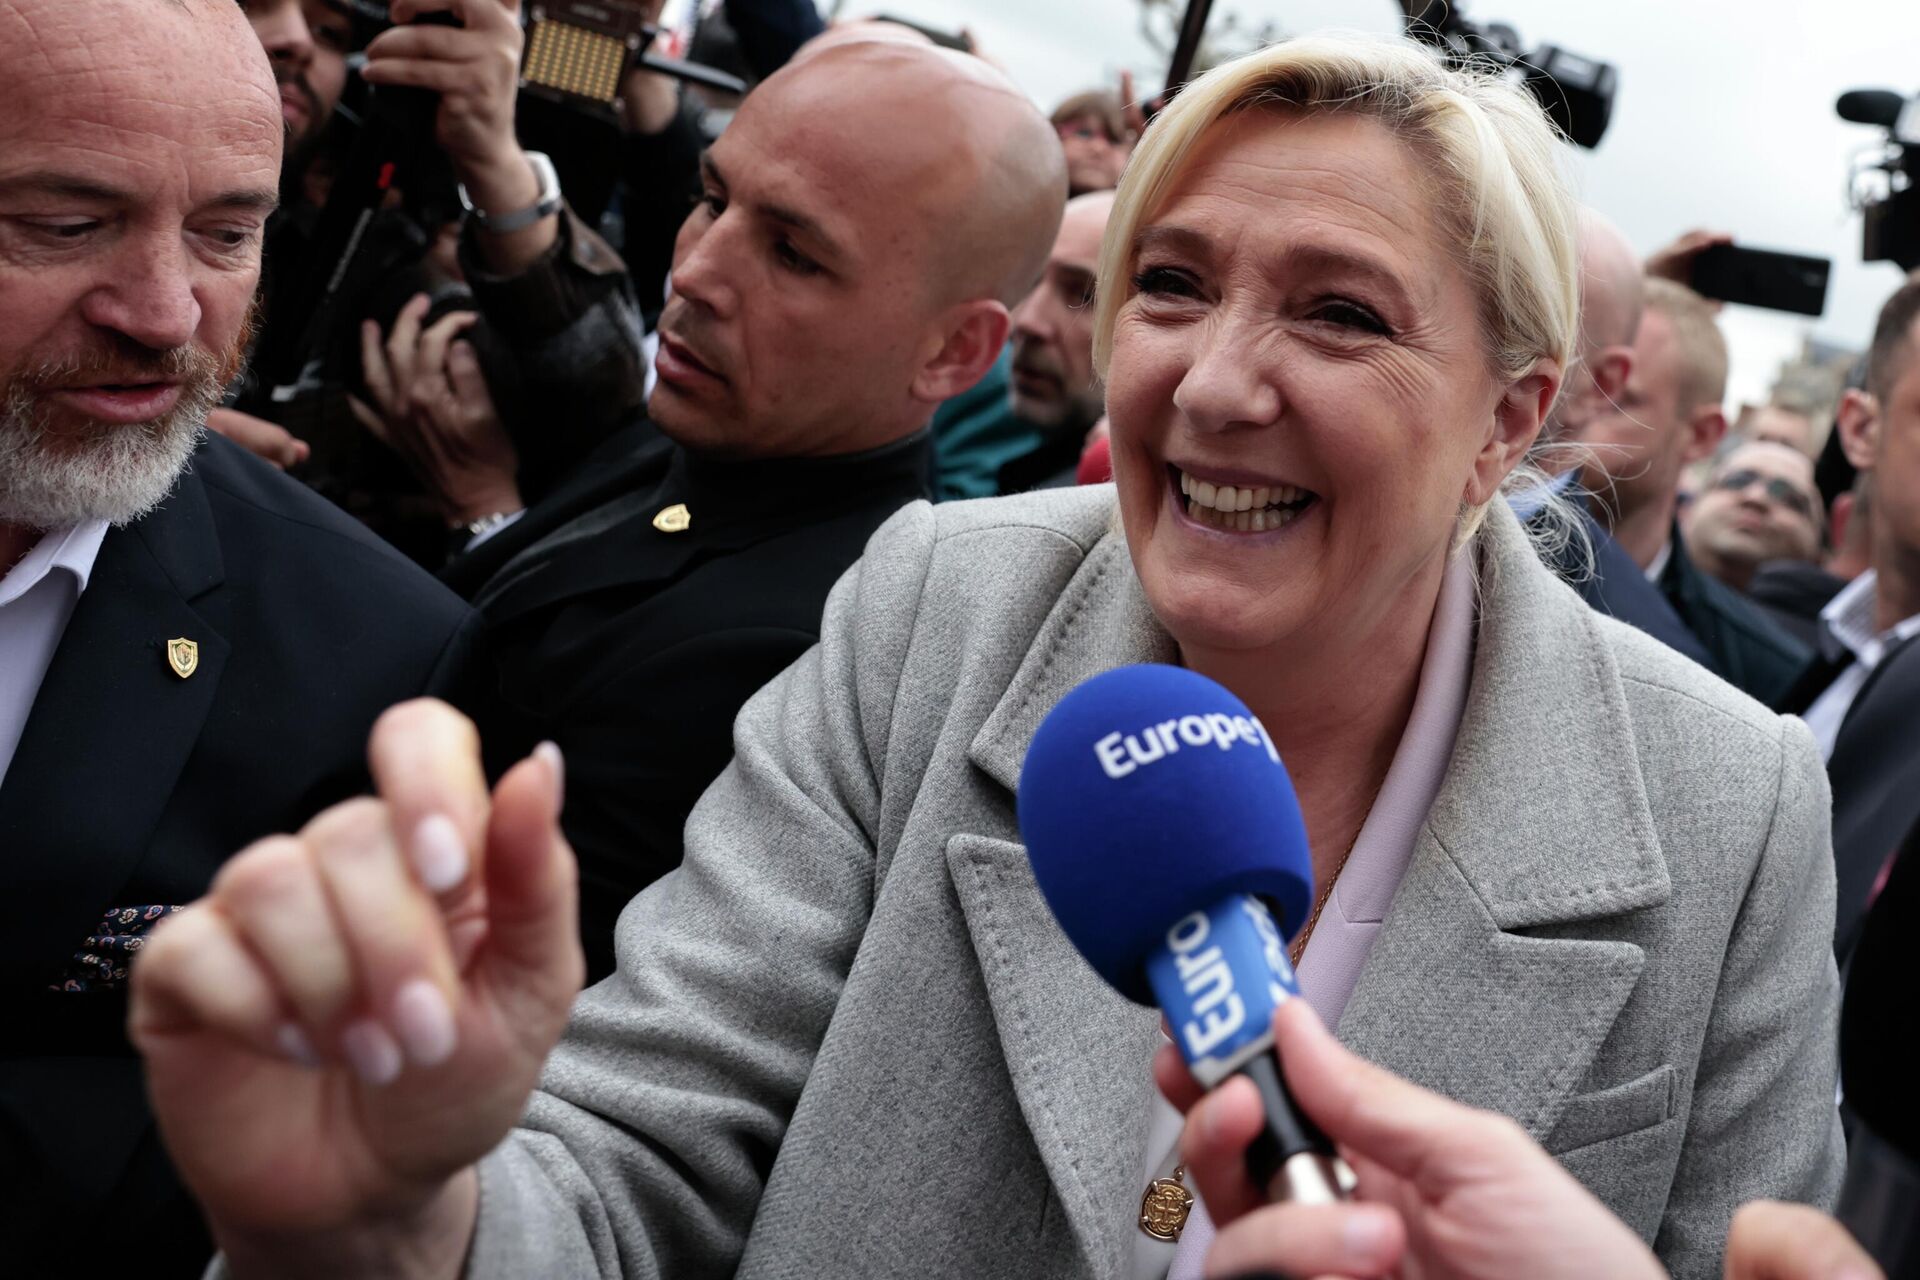 French far-right leader Marine Le Pen smiles as she arrives for a campaign stop Monday, April 18, 2022 in Saint-Pierre-en-Auge, Normandy. French President Emmanuel Macron is facing off against far-right challenger Marine Le Pen in France's April 24 presidential runoff.  - Sputnik International, 1920, 24.04.2022